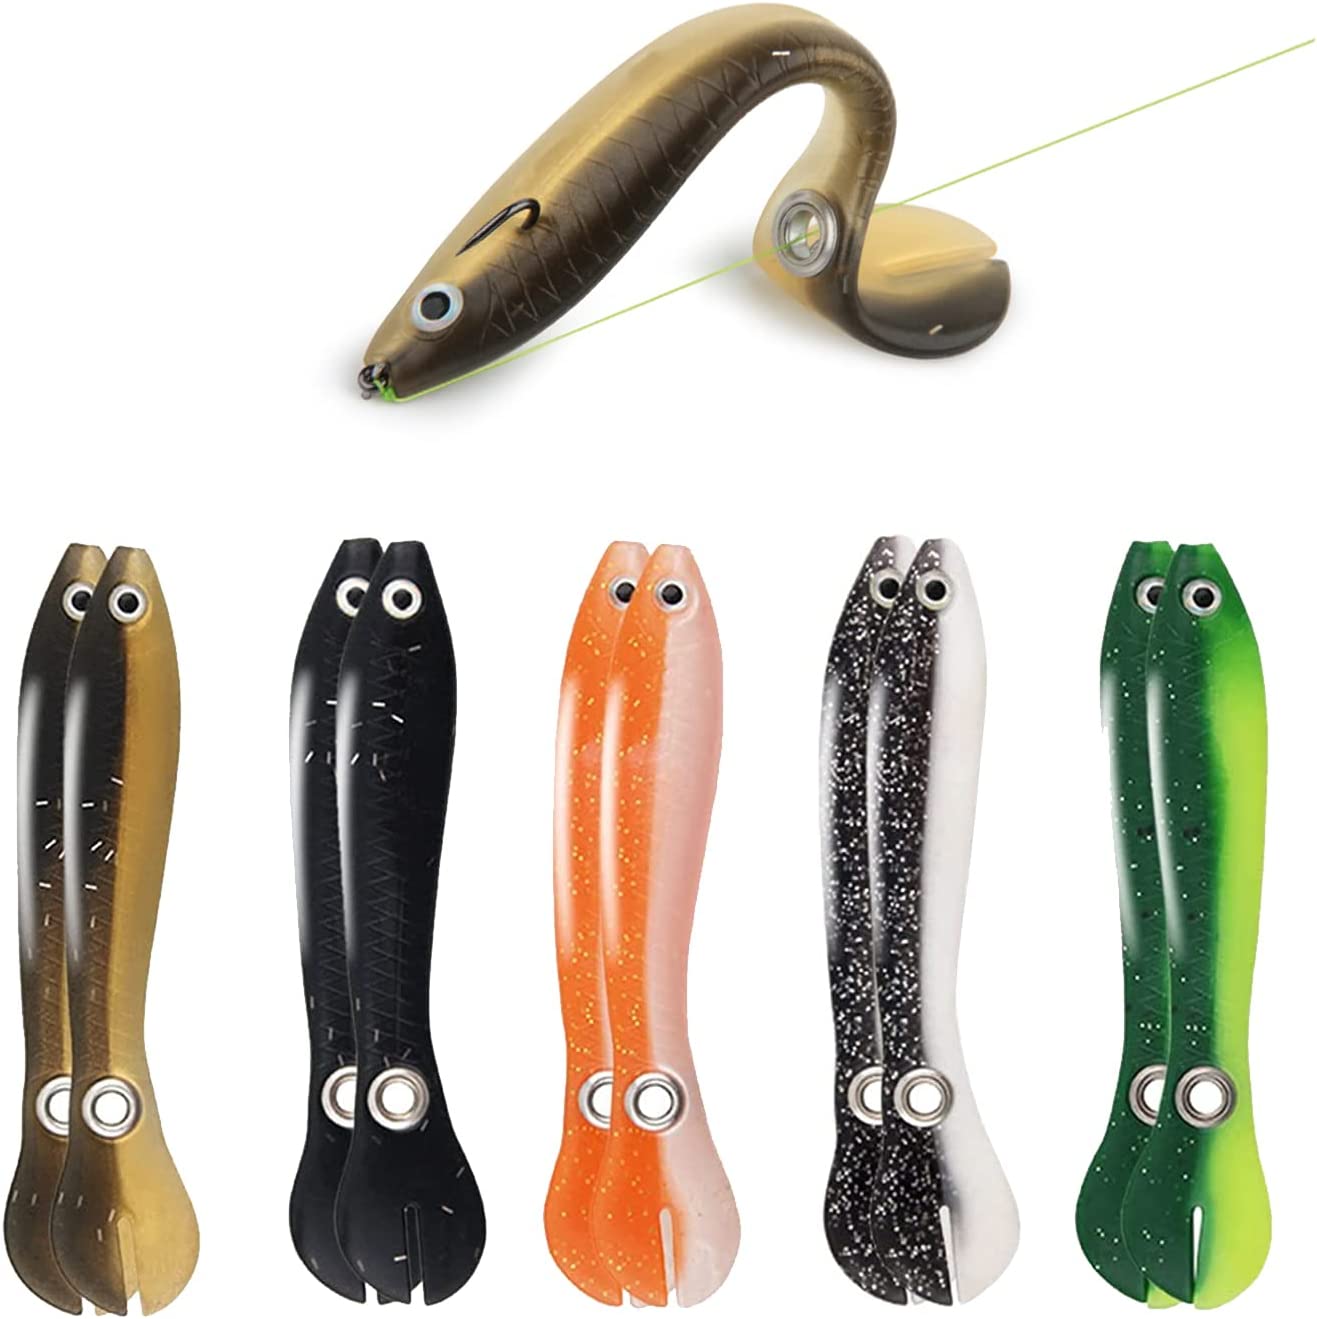  [5Pcs/Lot] Fishing Lures with Holographic Eyes - Floating Micro  Crankbait Treble Hook Set for Successful Fishing : Sports & Outdoors